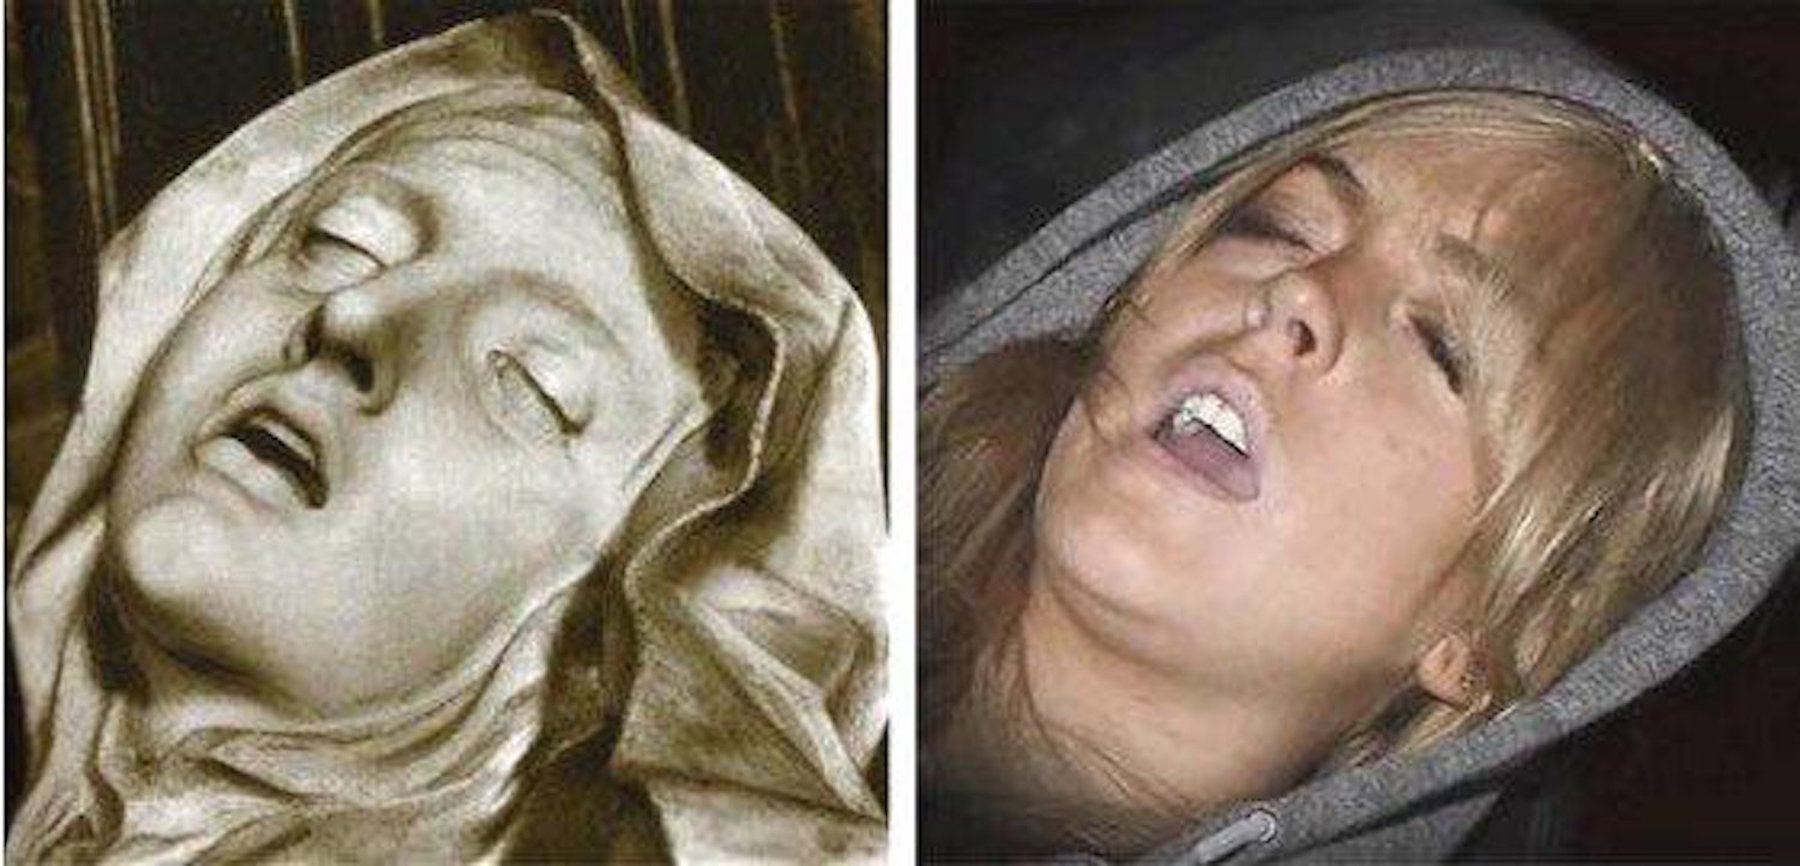 The Sad Story Behind the Passed-Out Lindsay Lohan Meme